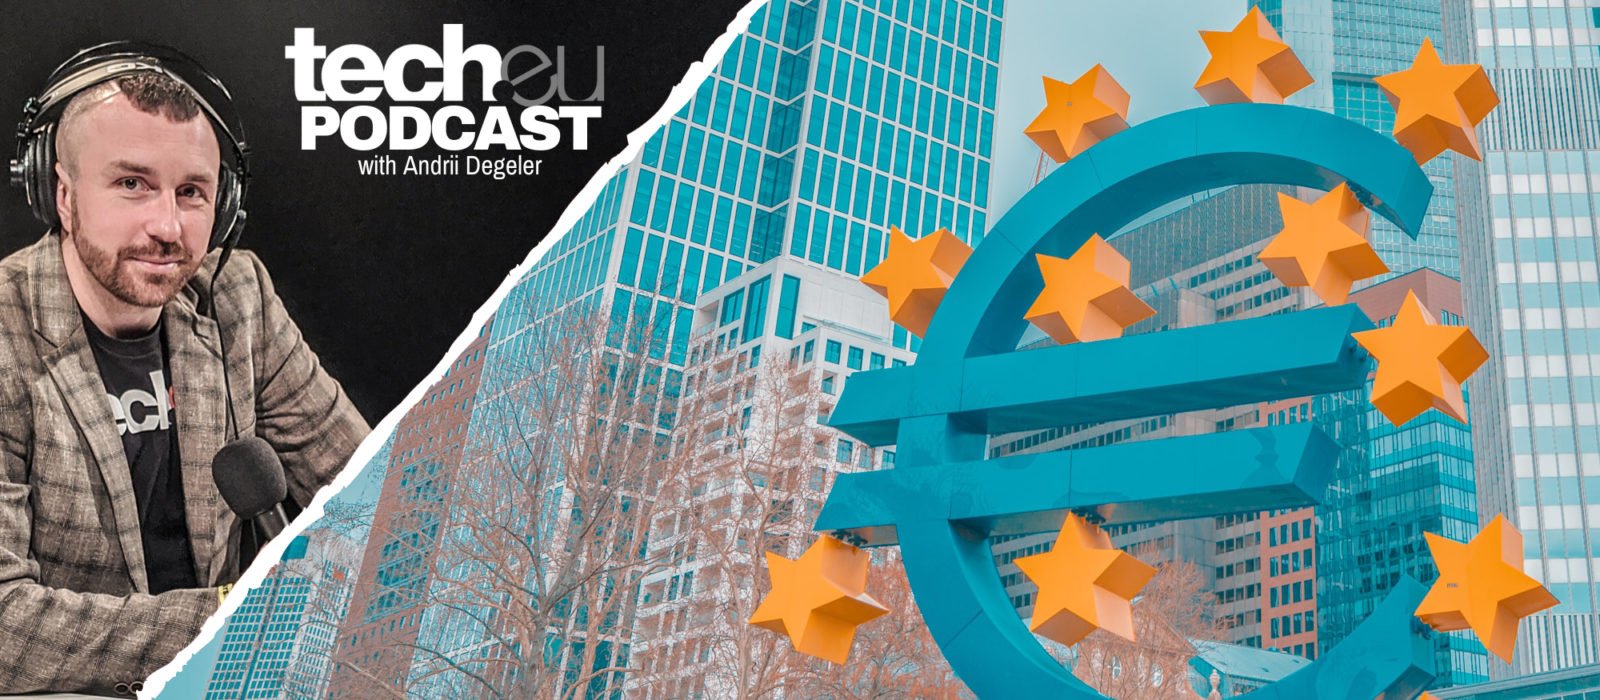 Tech.eu Podcast #202: What’s up with EIC Fund, newly announced European IPOs, funding rounds big and small, and more